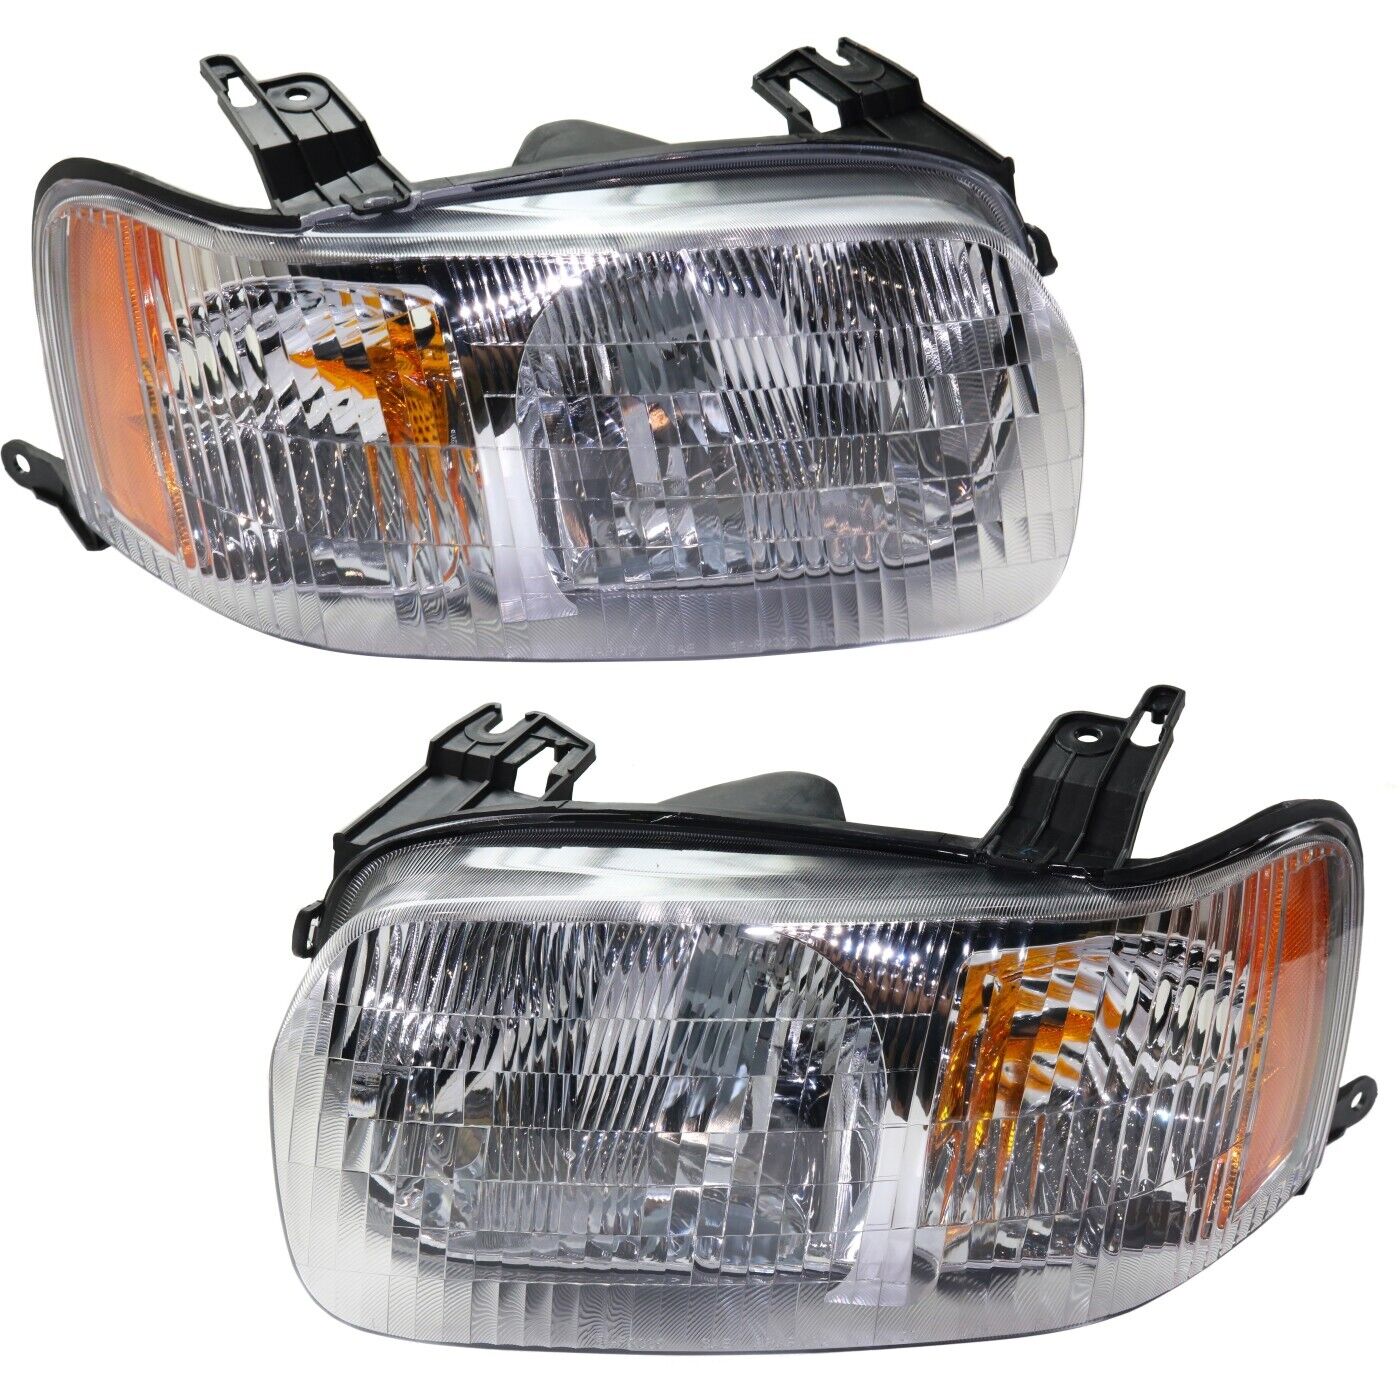 Headlight Set For 2001-2004 Ford Escape Driver and Passenger Side w/ bulb